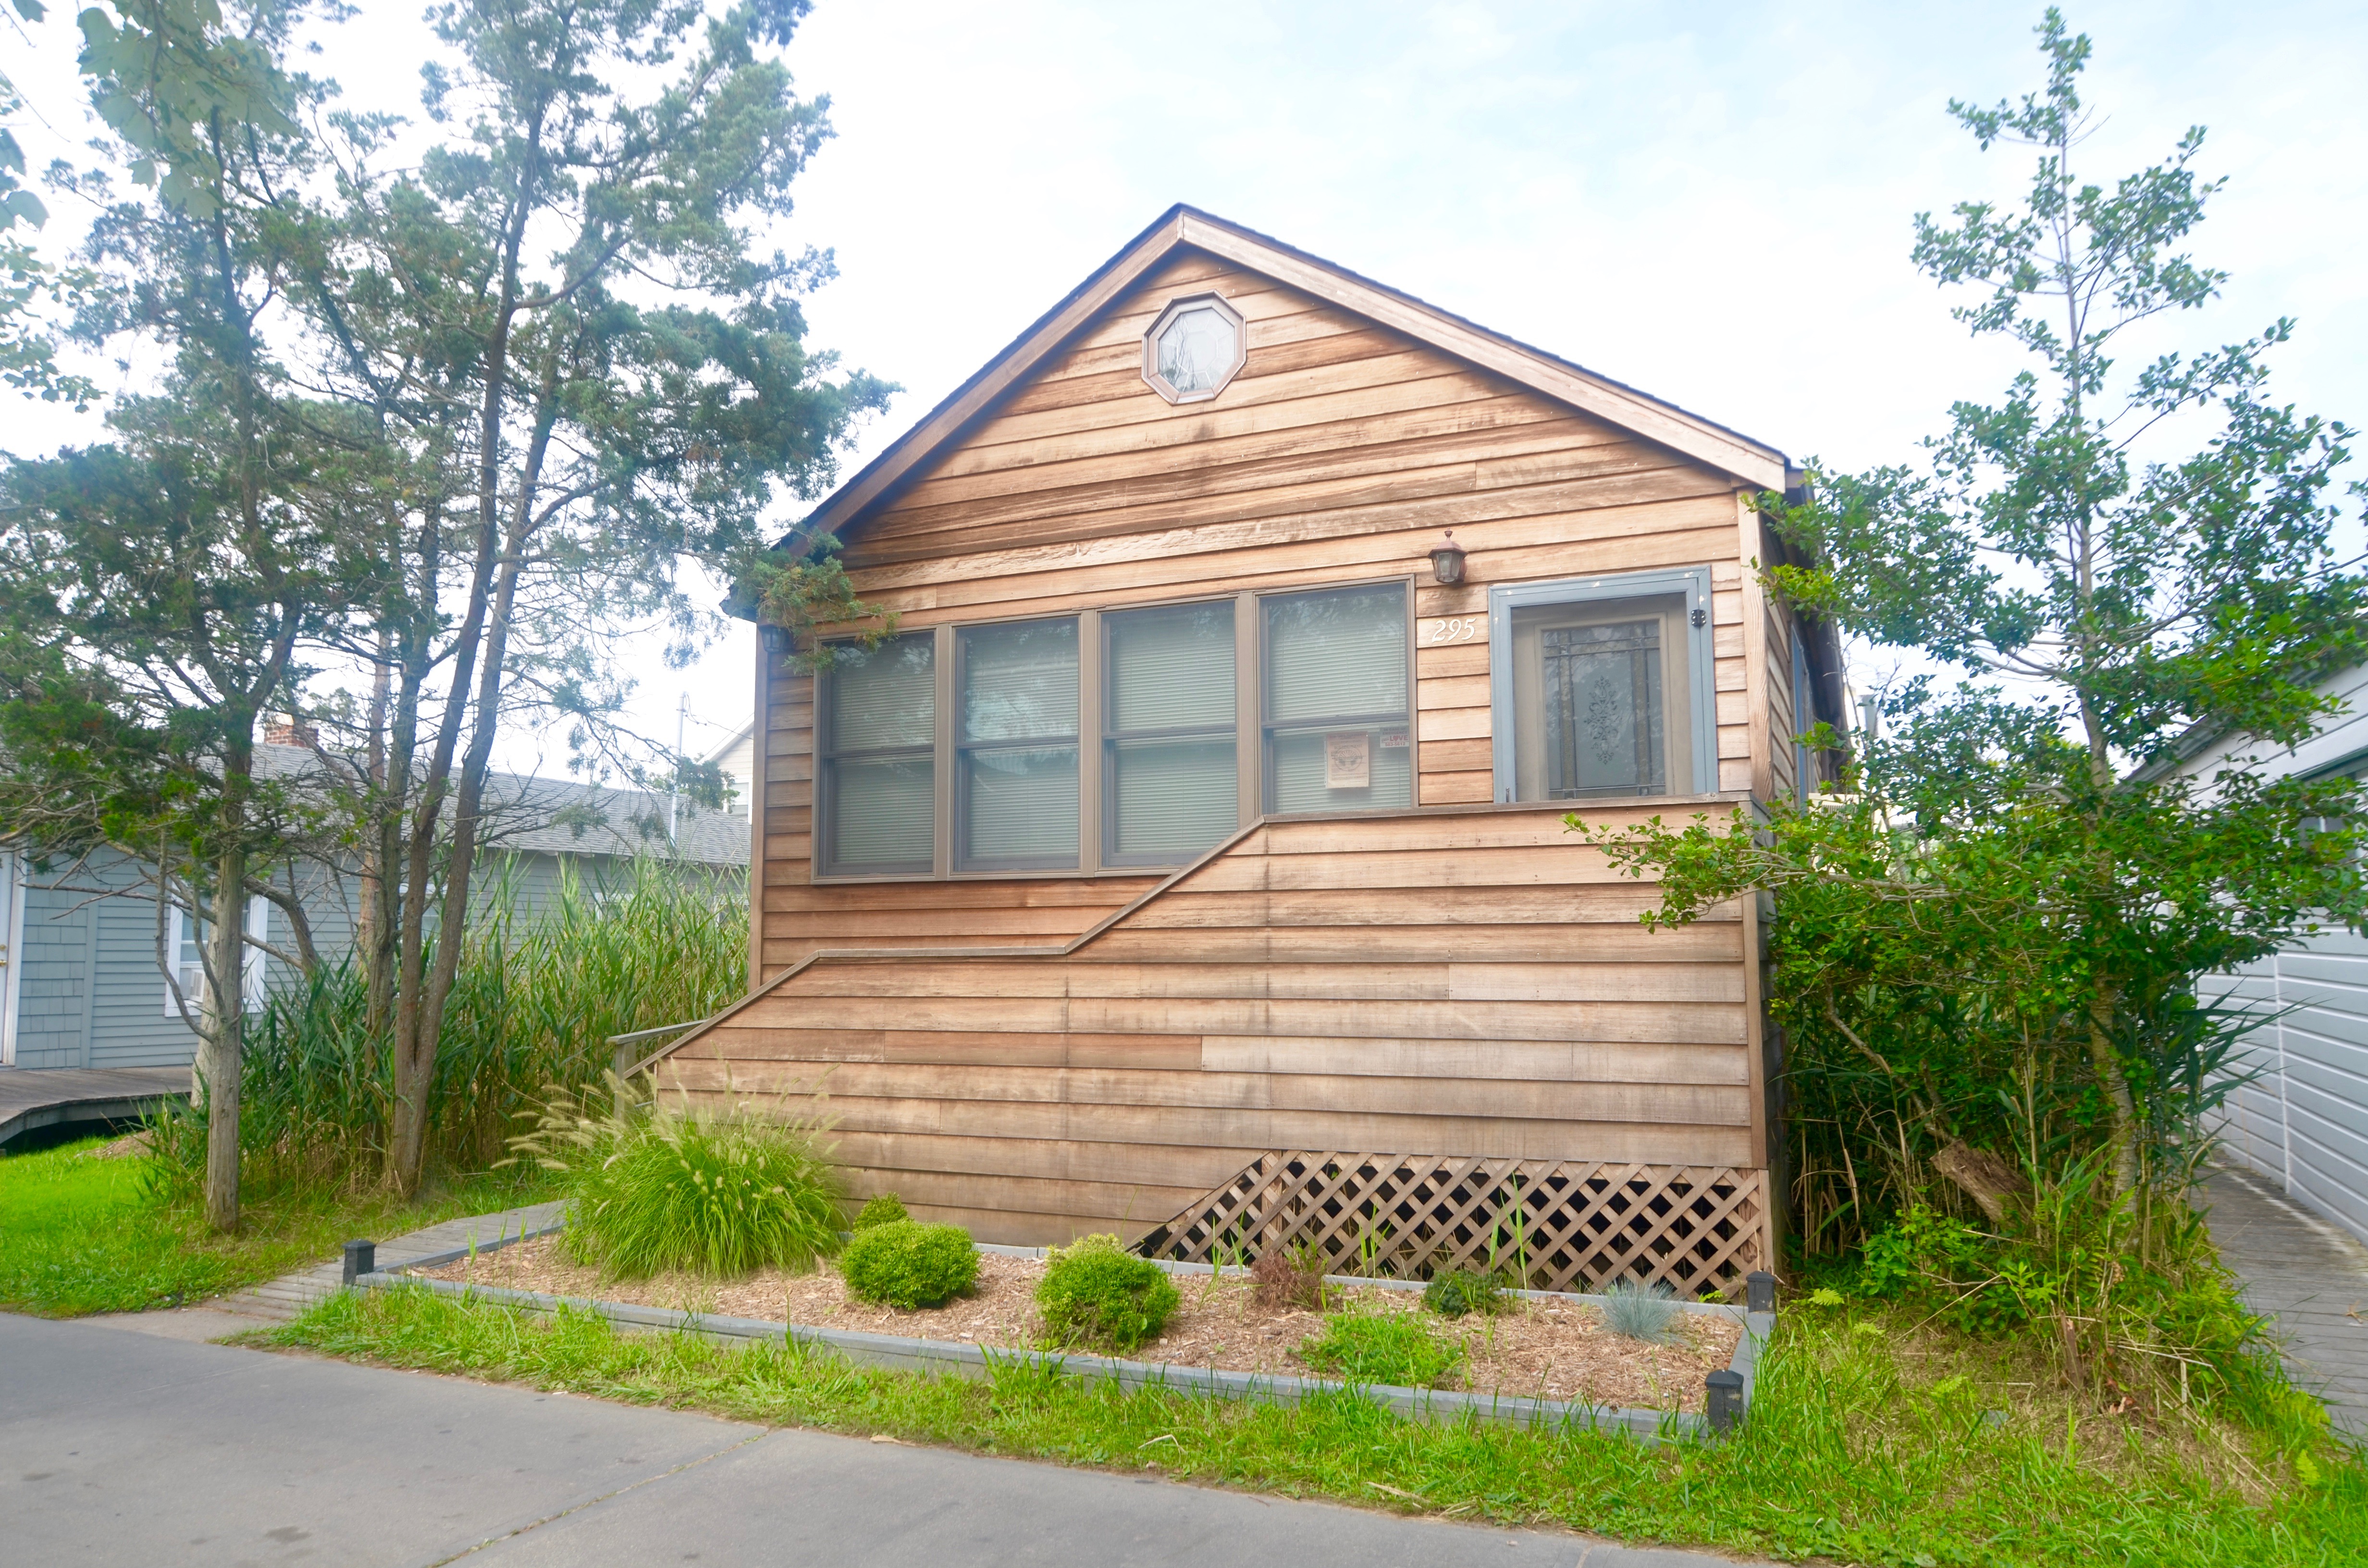 This welcoming cottage is suitable for year round use.  The comfortable living area is open to the kitchen and dining area.  Roof and foundation recently replaced.  Large master bedroom with attached half bath.  Sunny rear deck and outdoor shower.  Great starter home at an excellent price!